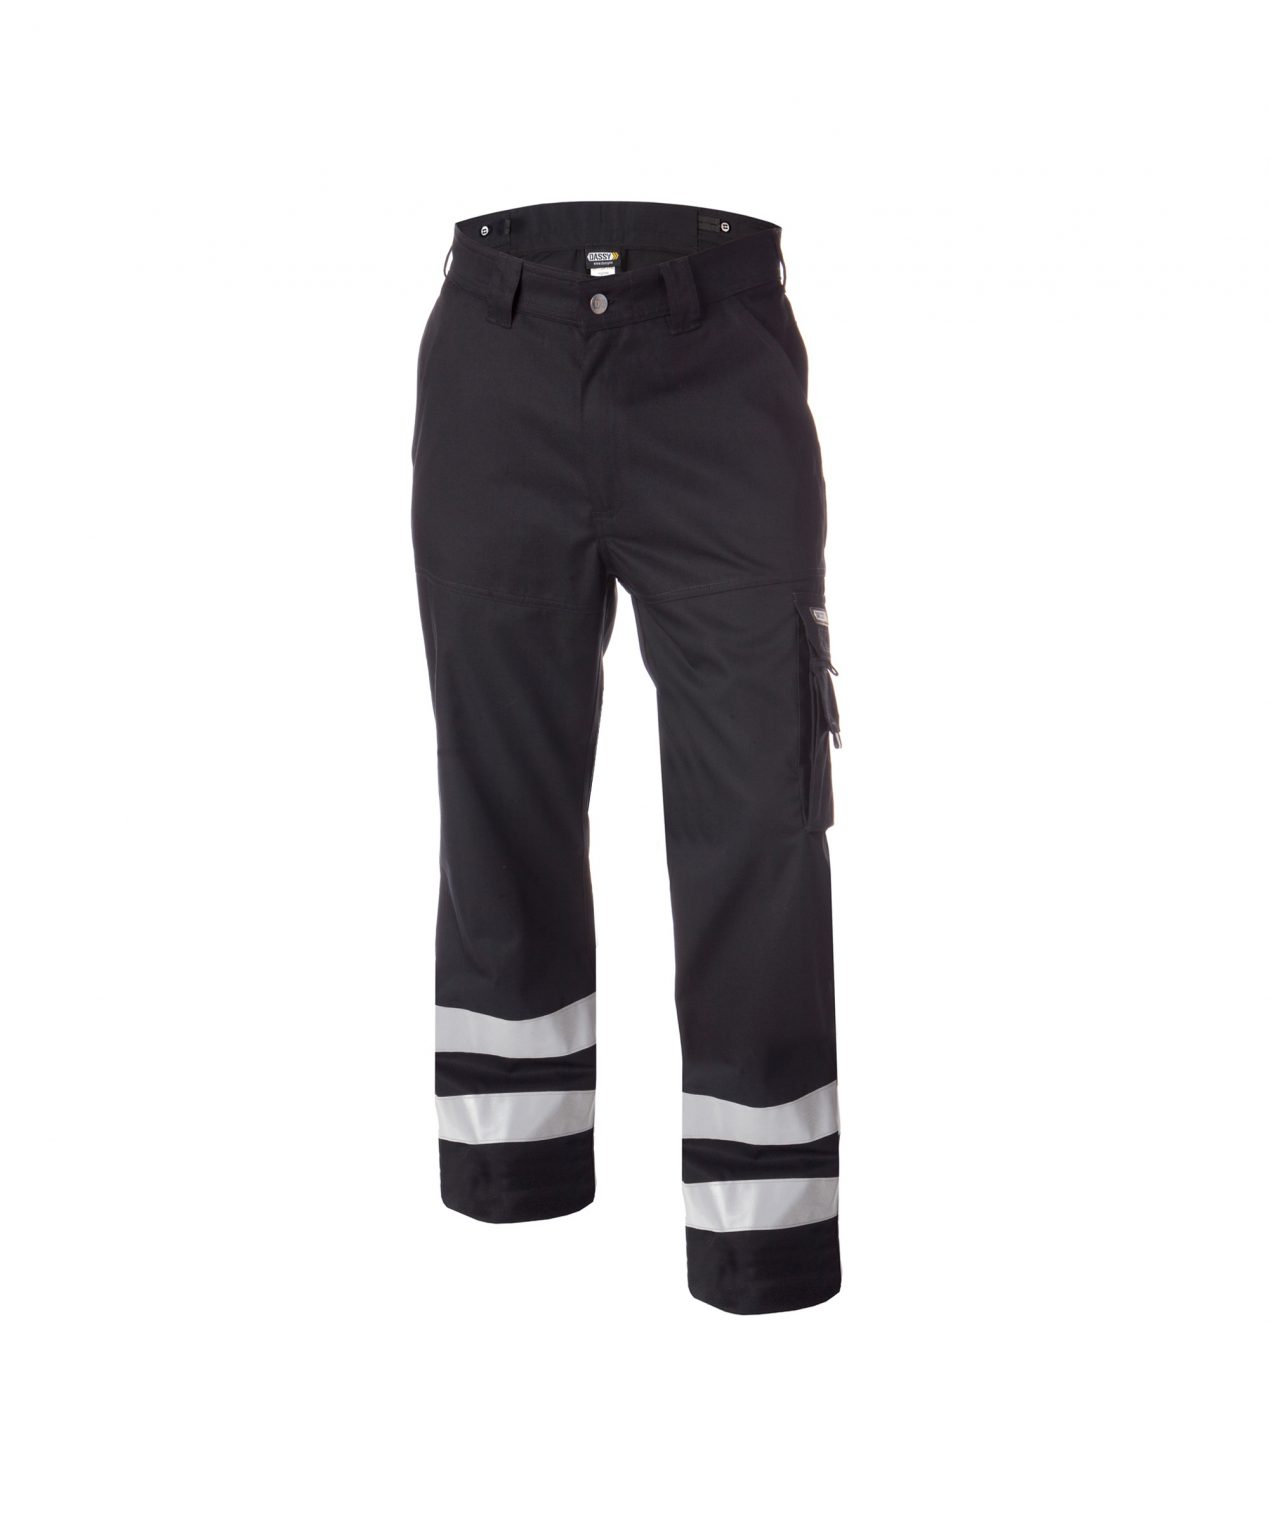 vegas work trousers with reflective tape black front